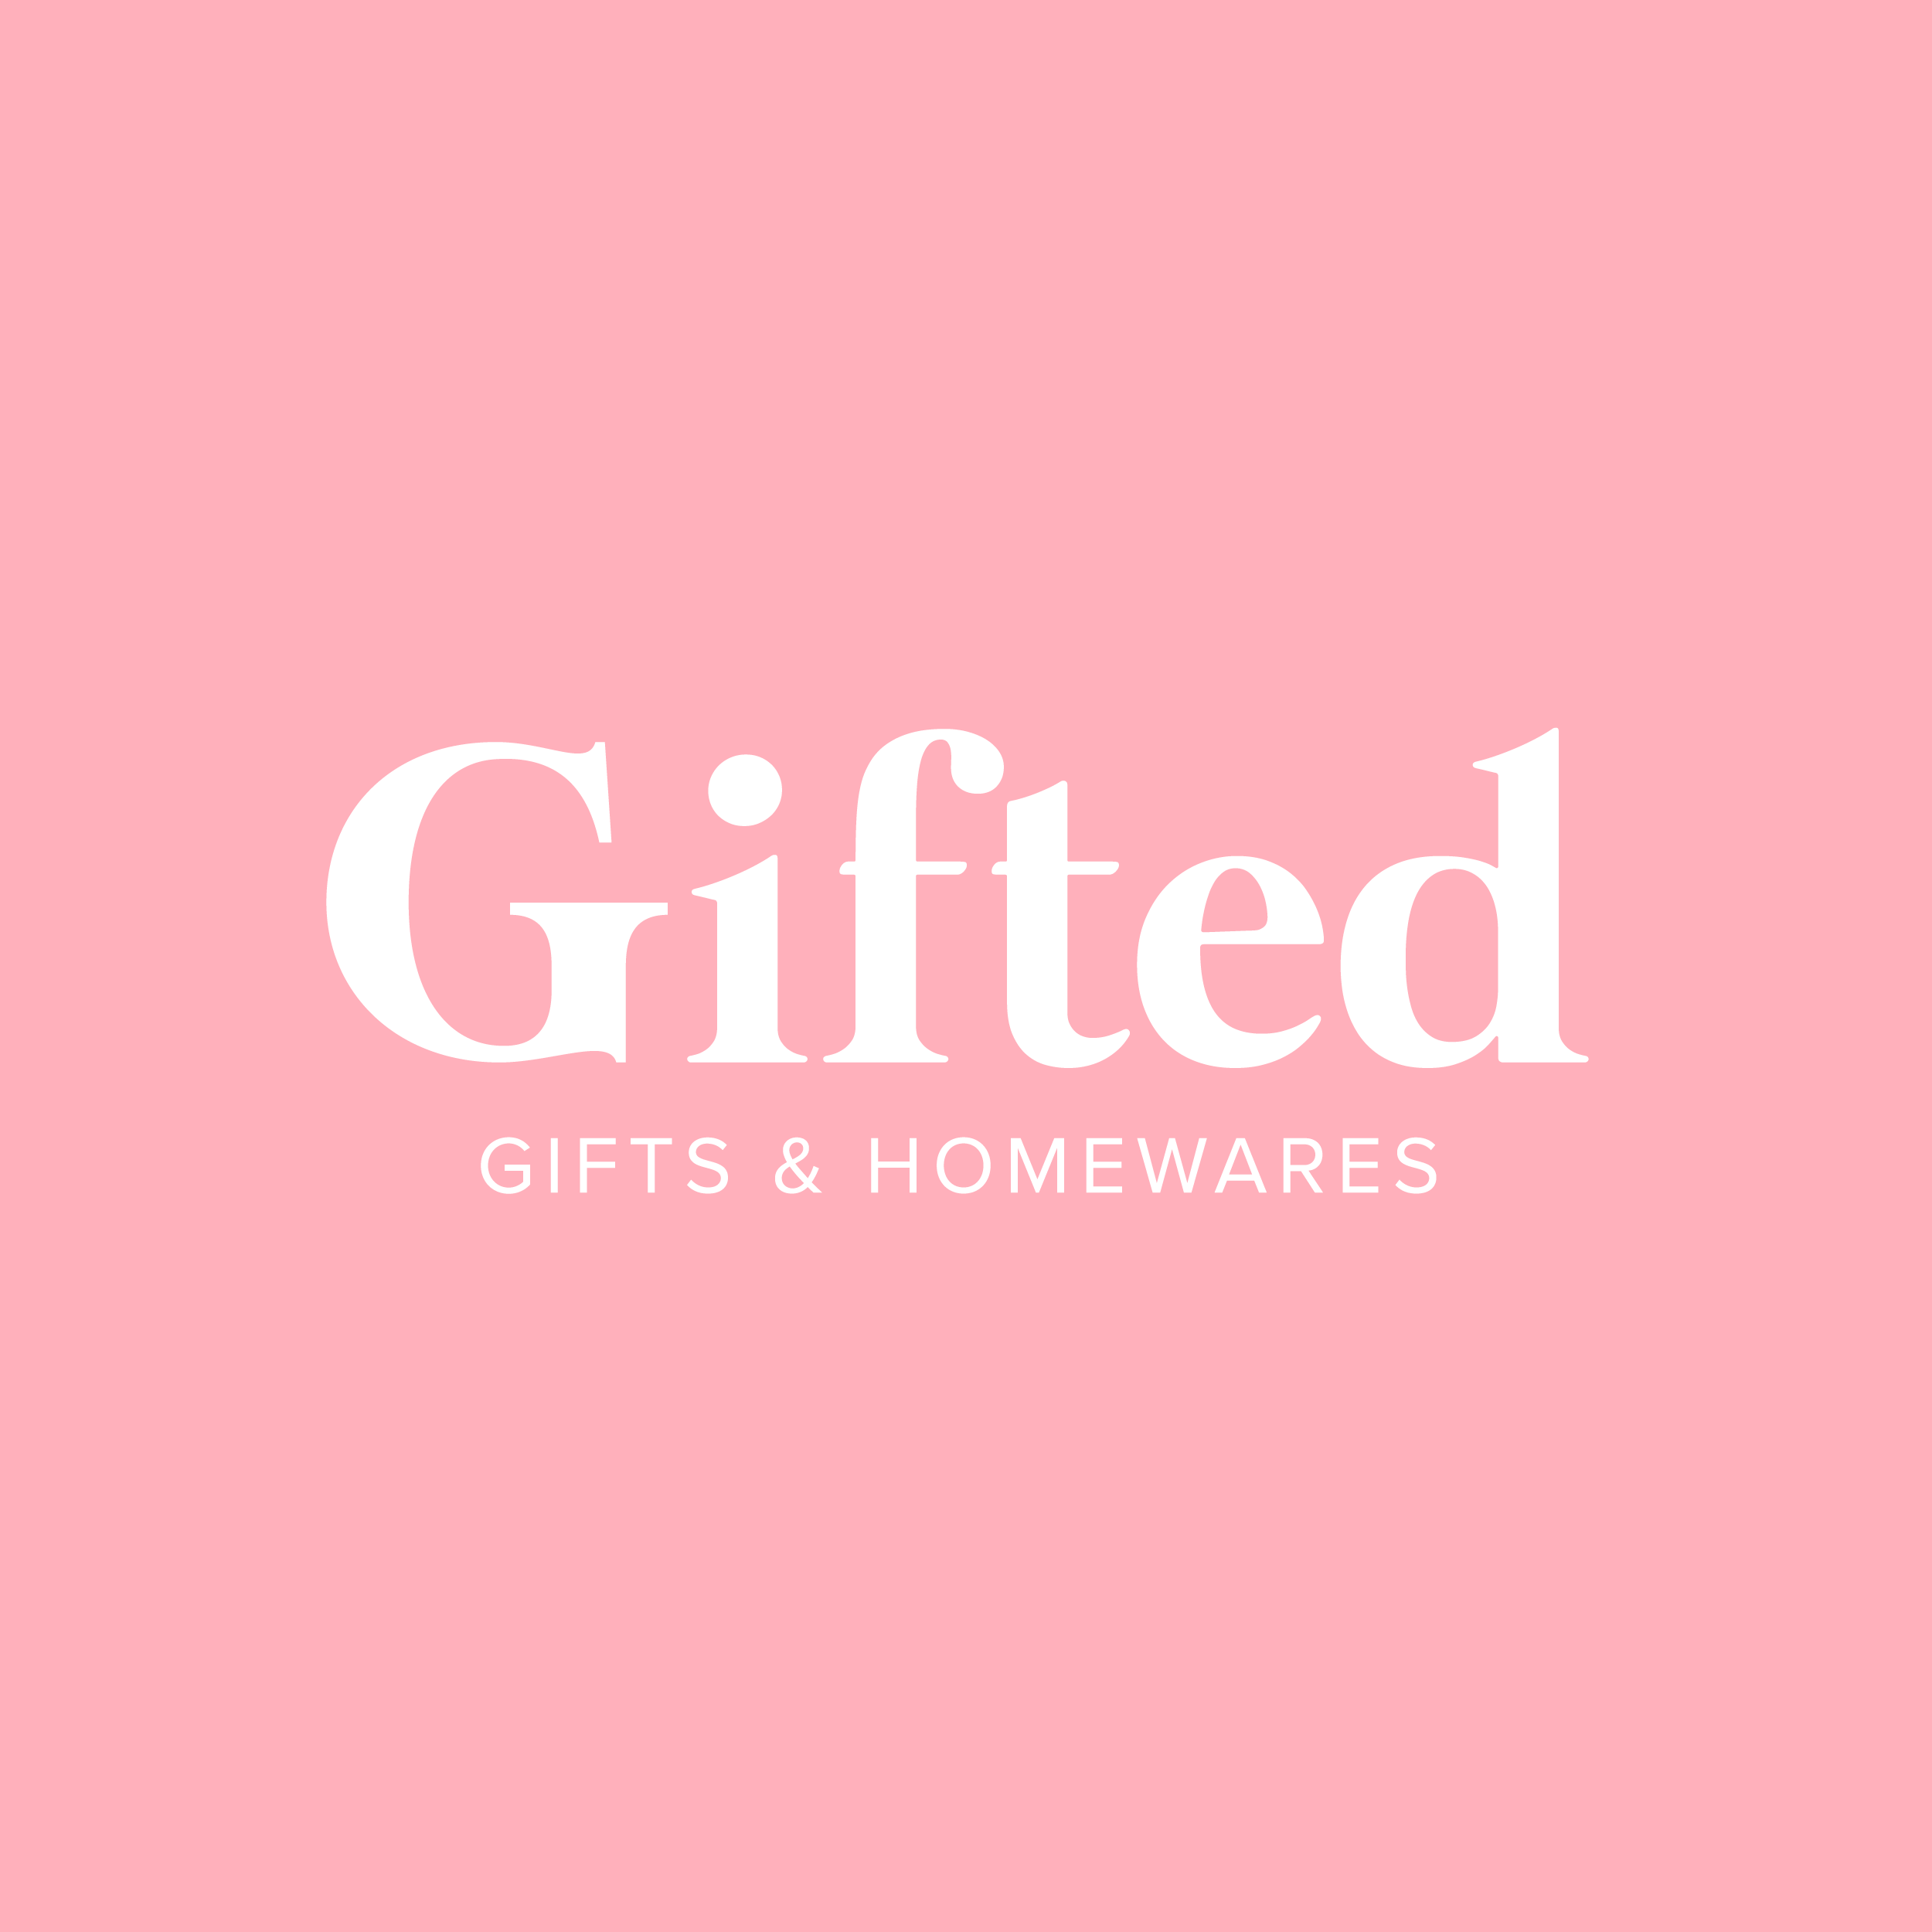 Gifted gifts e-commerce showcase